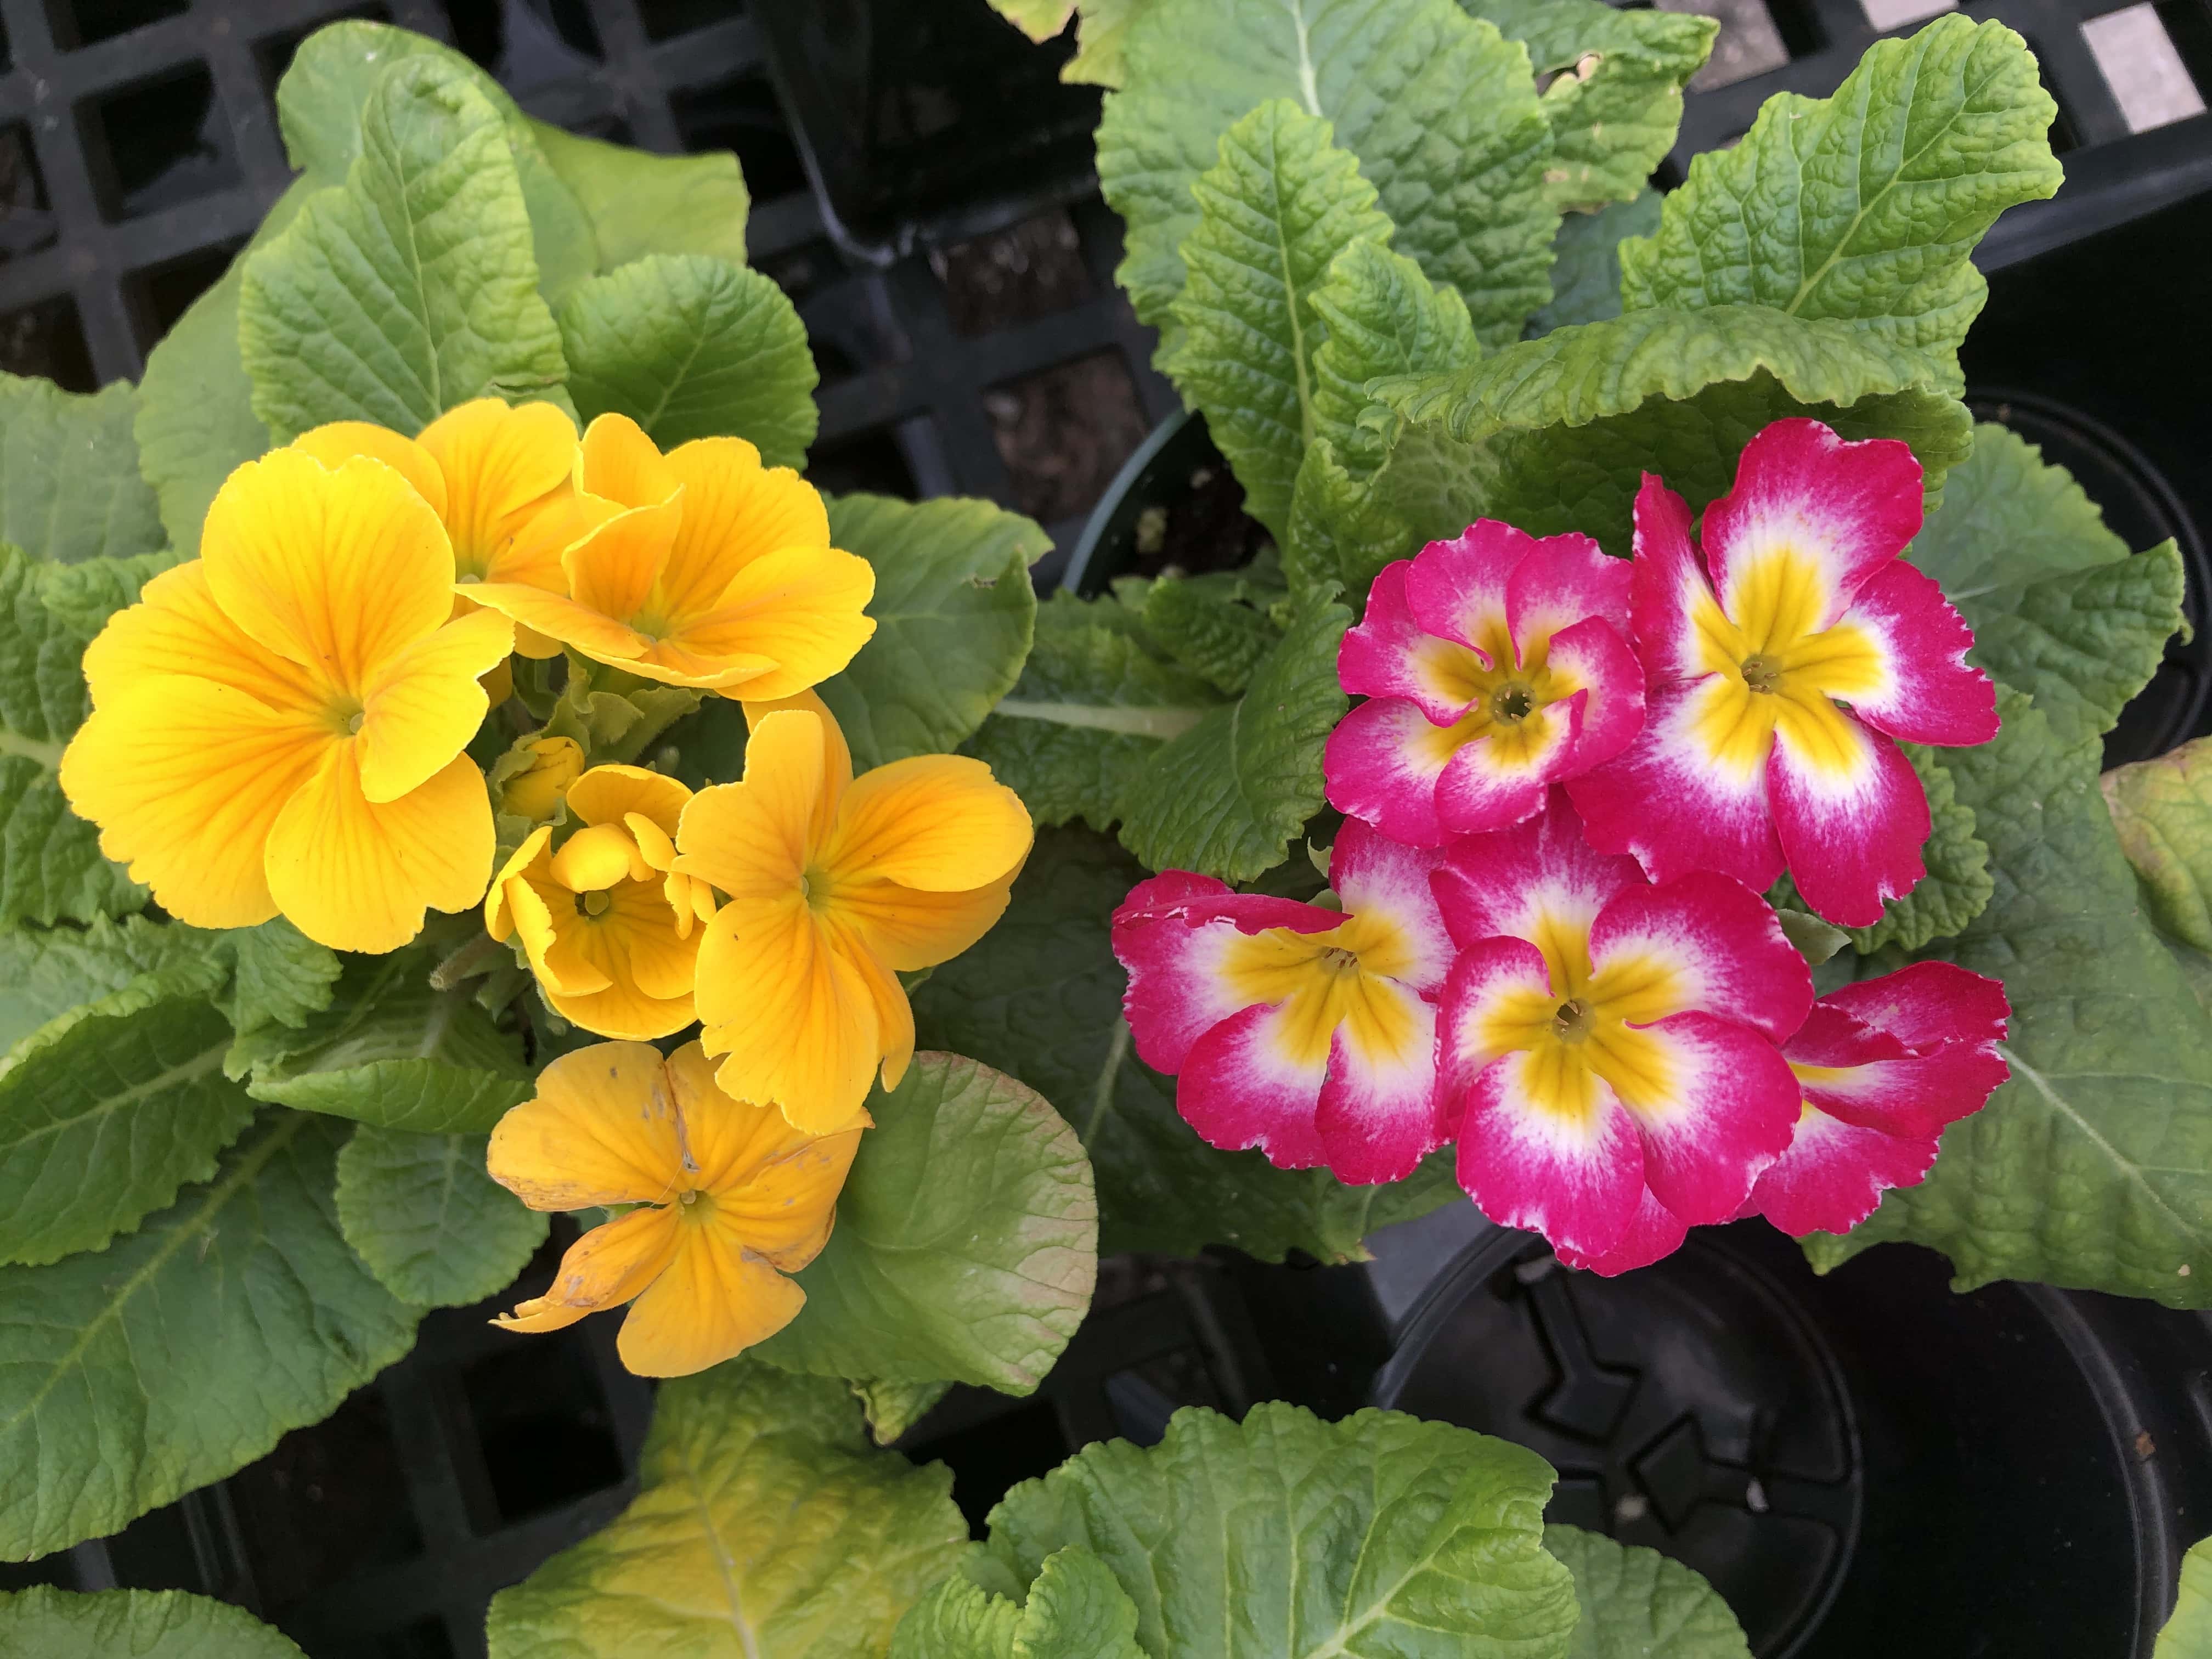 primrose plants flowering: on the left is bright yellow and on the right is pink edges with yellow centers